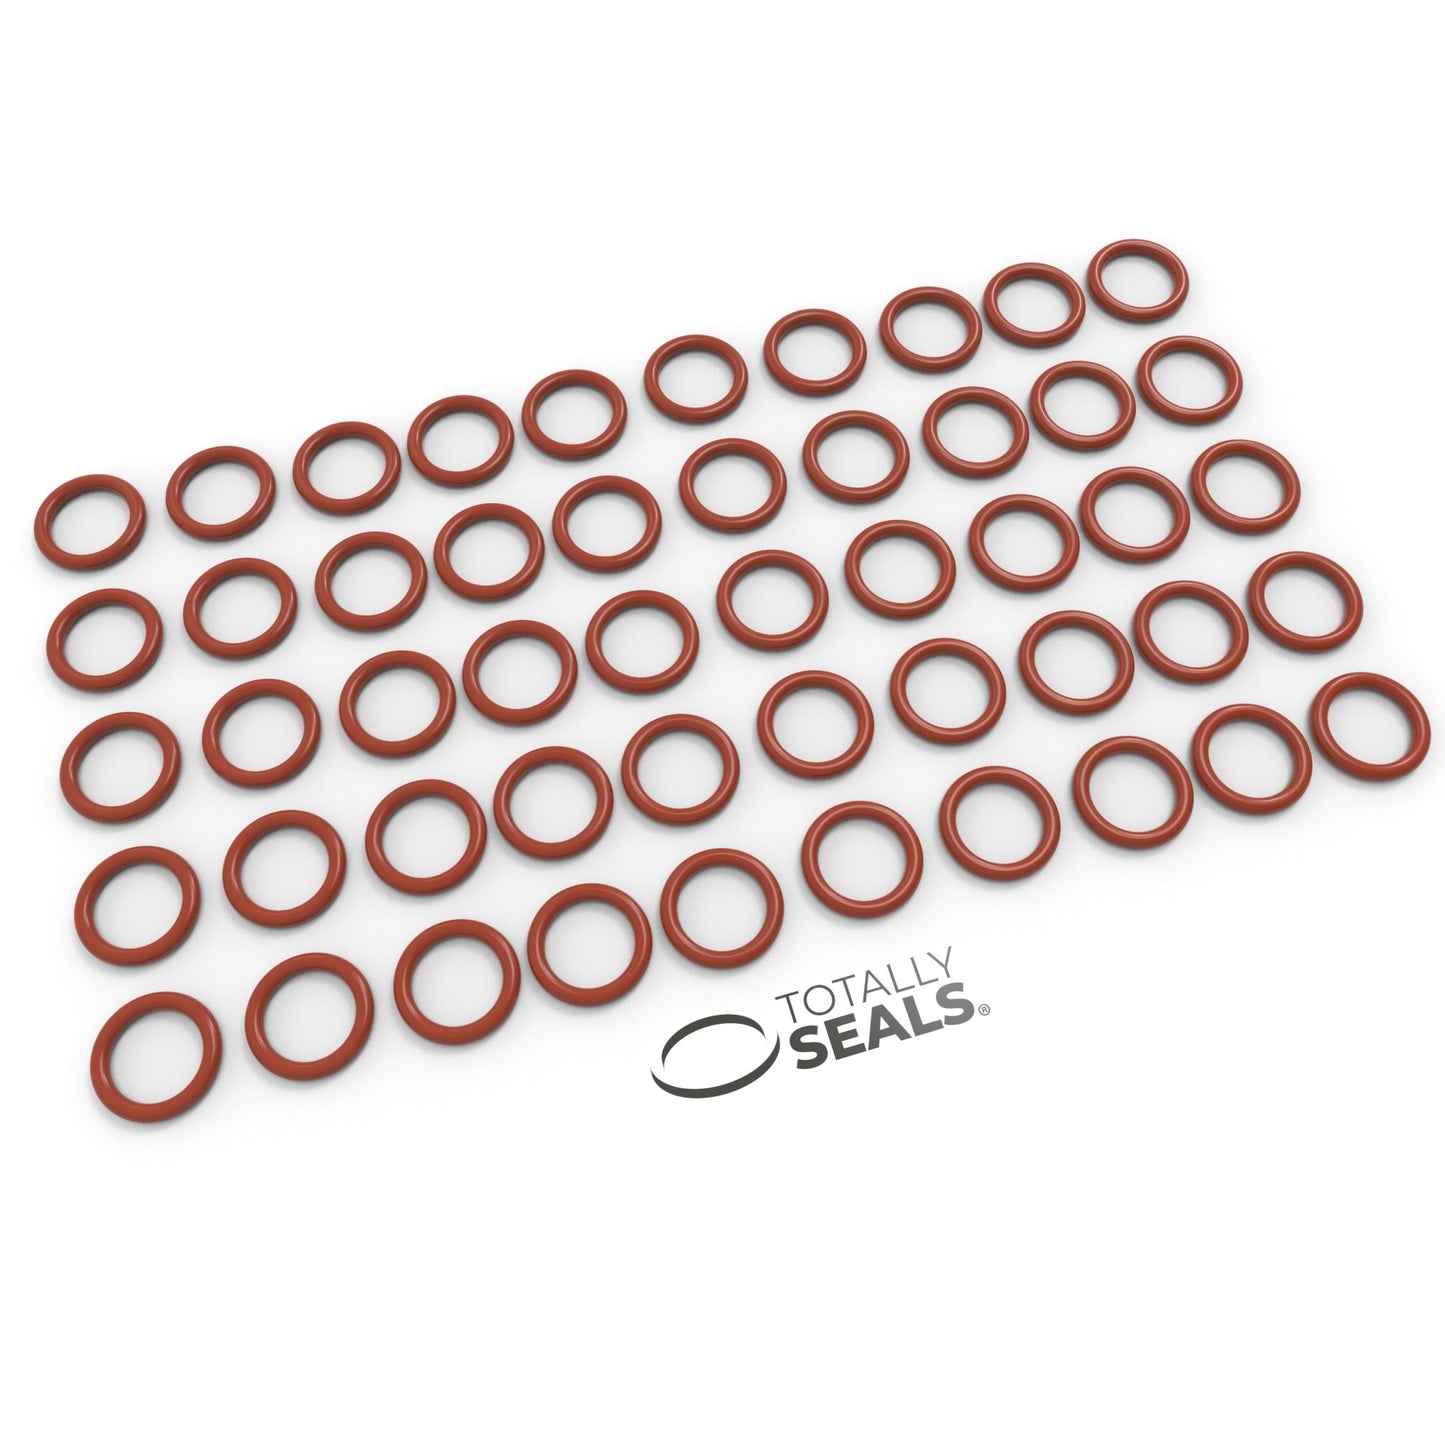 21mm x 3mm (27mm OD) Silicone O-Rings - Totally Seals®